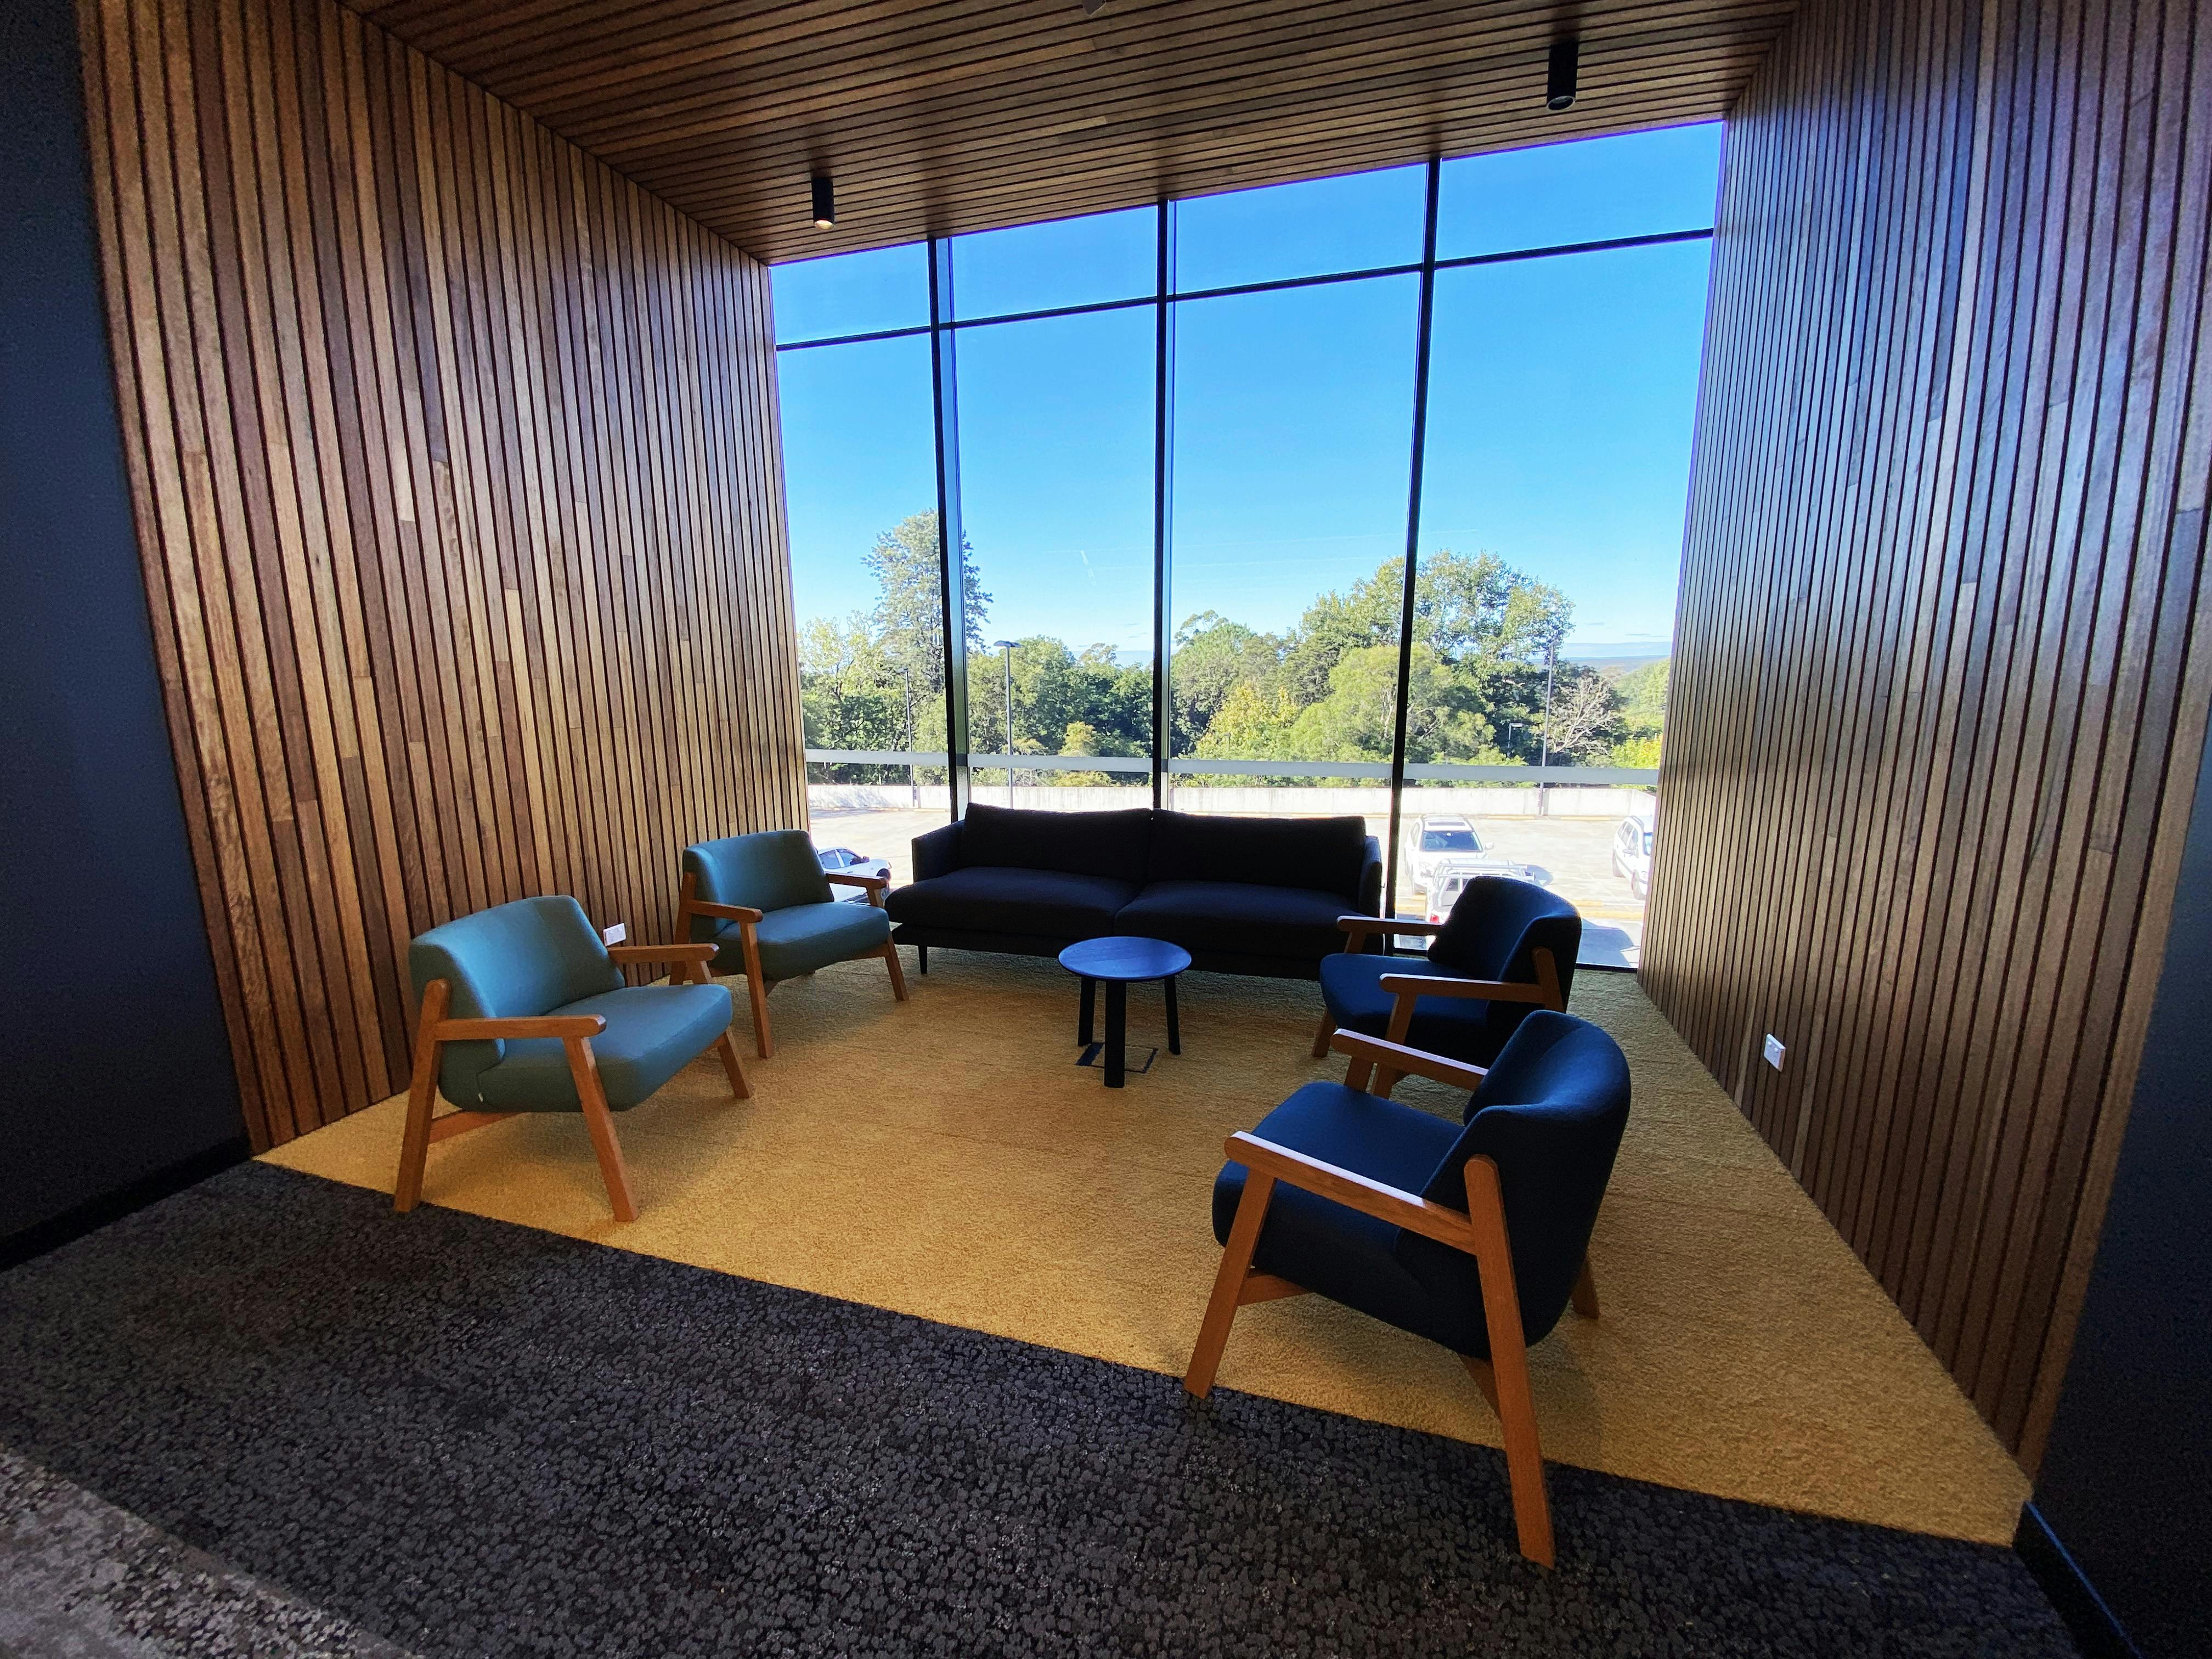 One of the reading and study areas